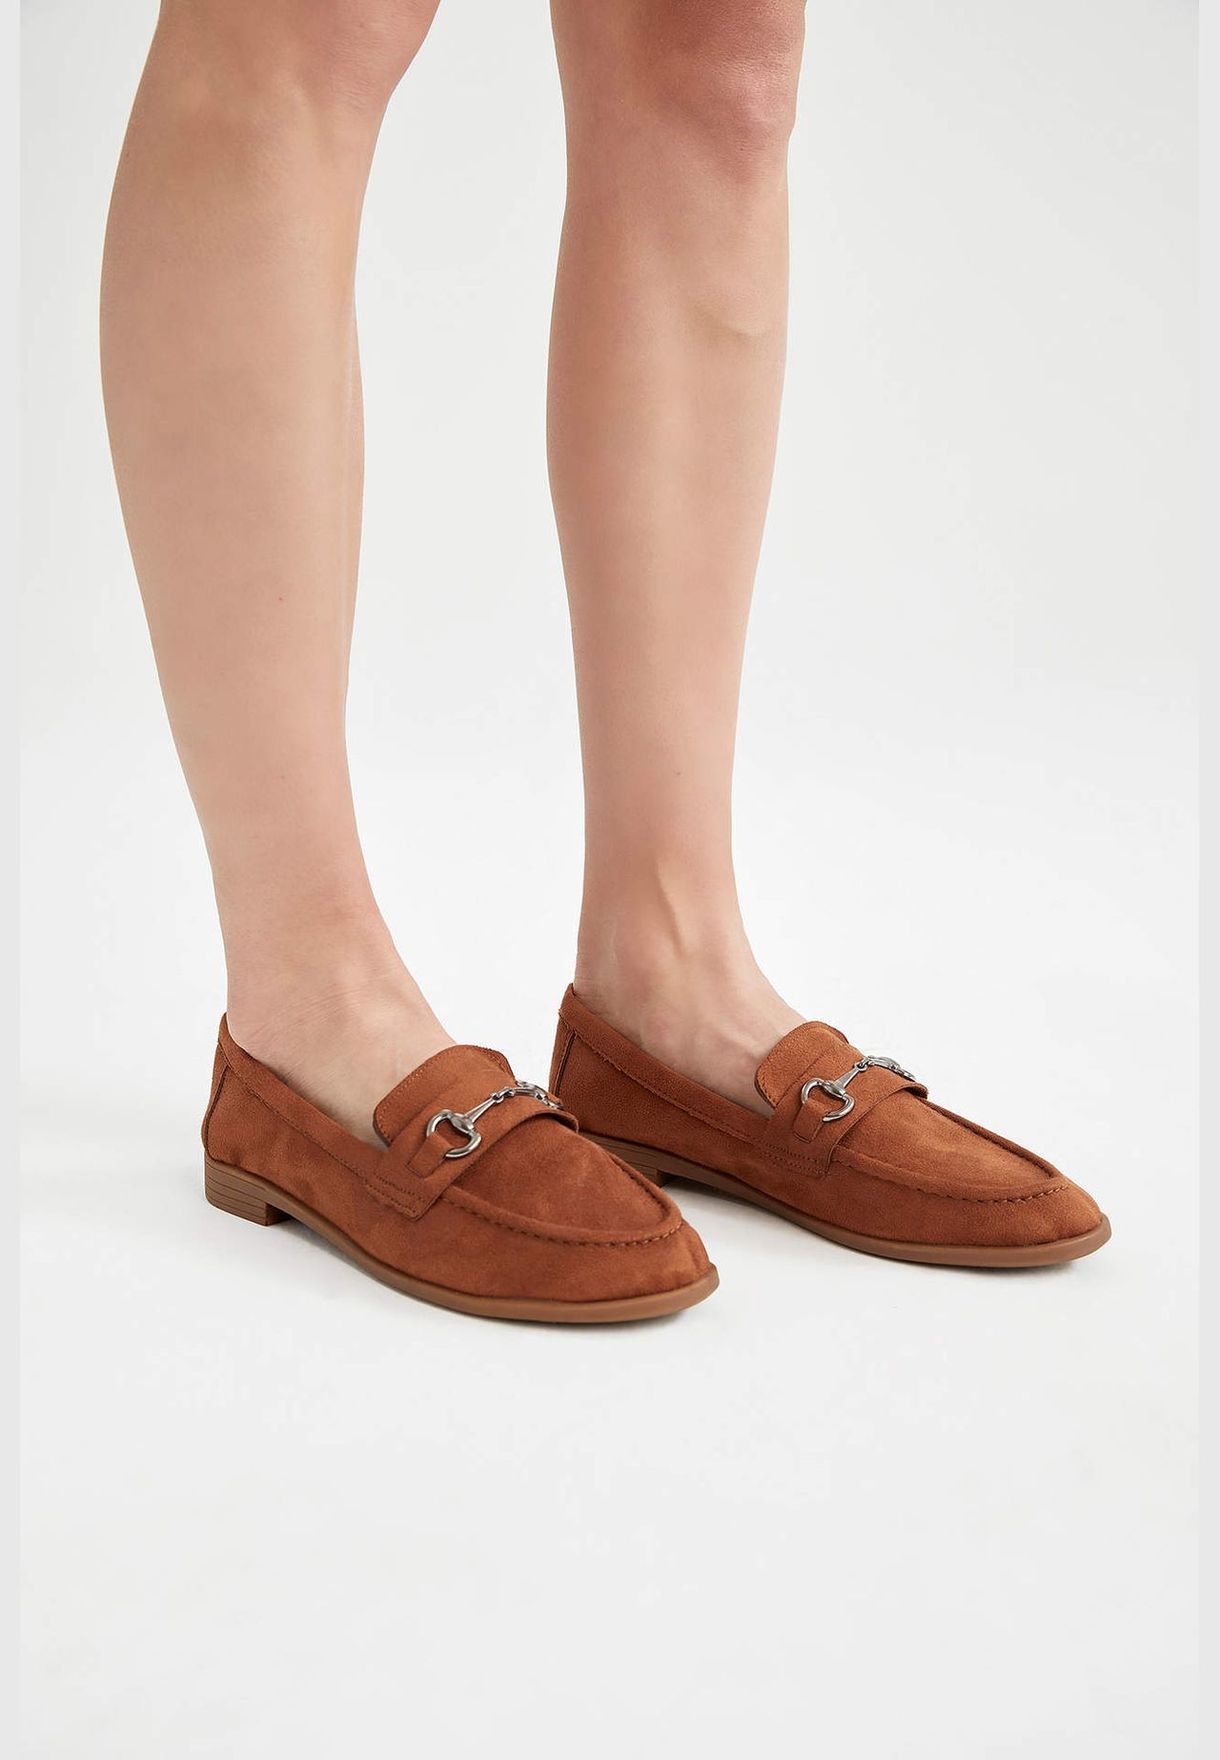 Faux Leather Flat Shoes